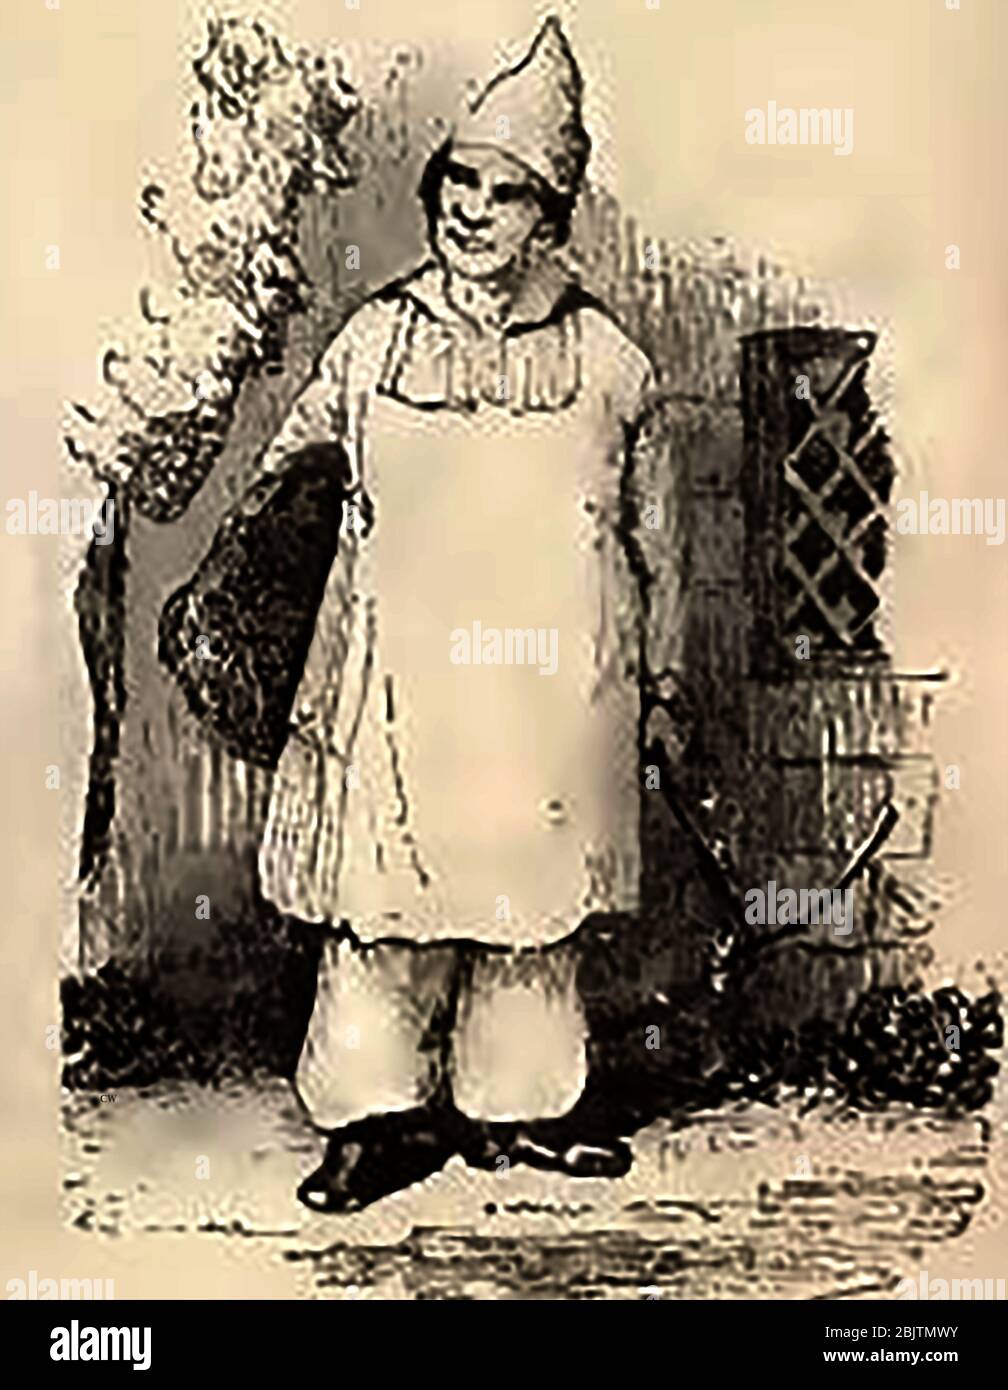 An 1850's wash drawing of a Bilston colliery  (UK) miner in his work clothes.There were a number of collieries in the district after the Industrial Revolution, prior to which it was a largely rural area dependent on farming. By 1900, numerous factories and coalmines could be found along with houses especially built for the workers.  The Bilston coal mines were supposedly  haunted by an evil spirit, and a local exorcist known as The White Rabbit was called in to rid the mines of the spirit. Stock Photo